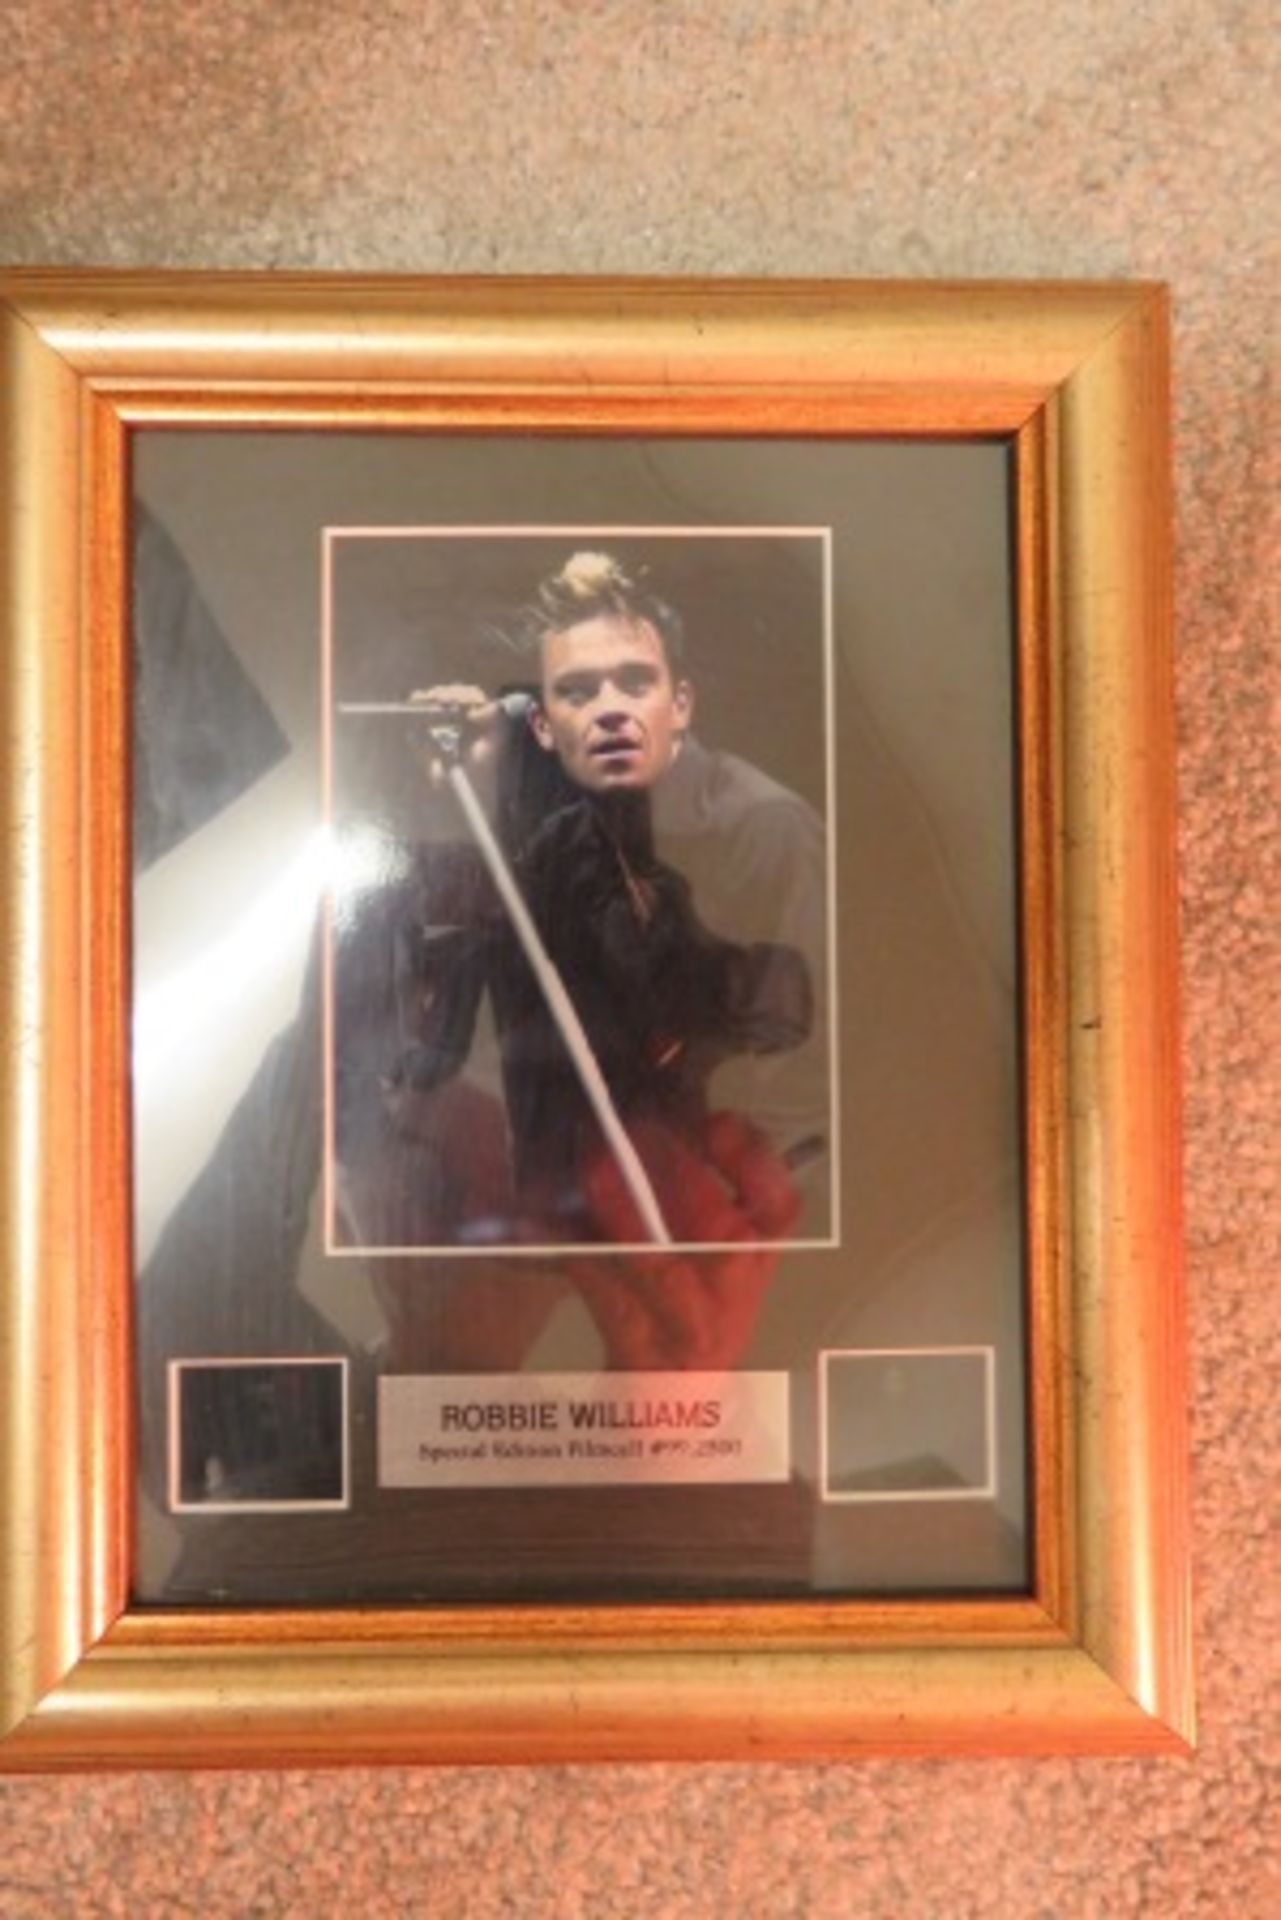 Limited Edition Robbie Williams Double Filmcell - Framed & Glazed - #99 Of 2500